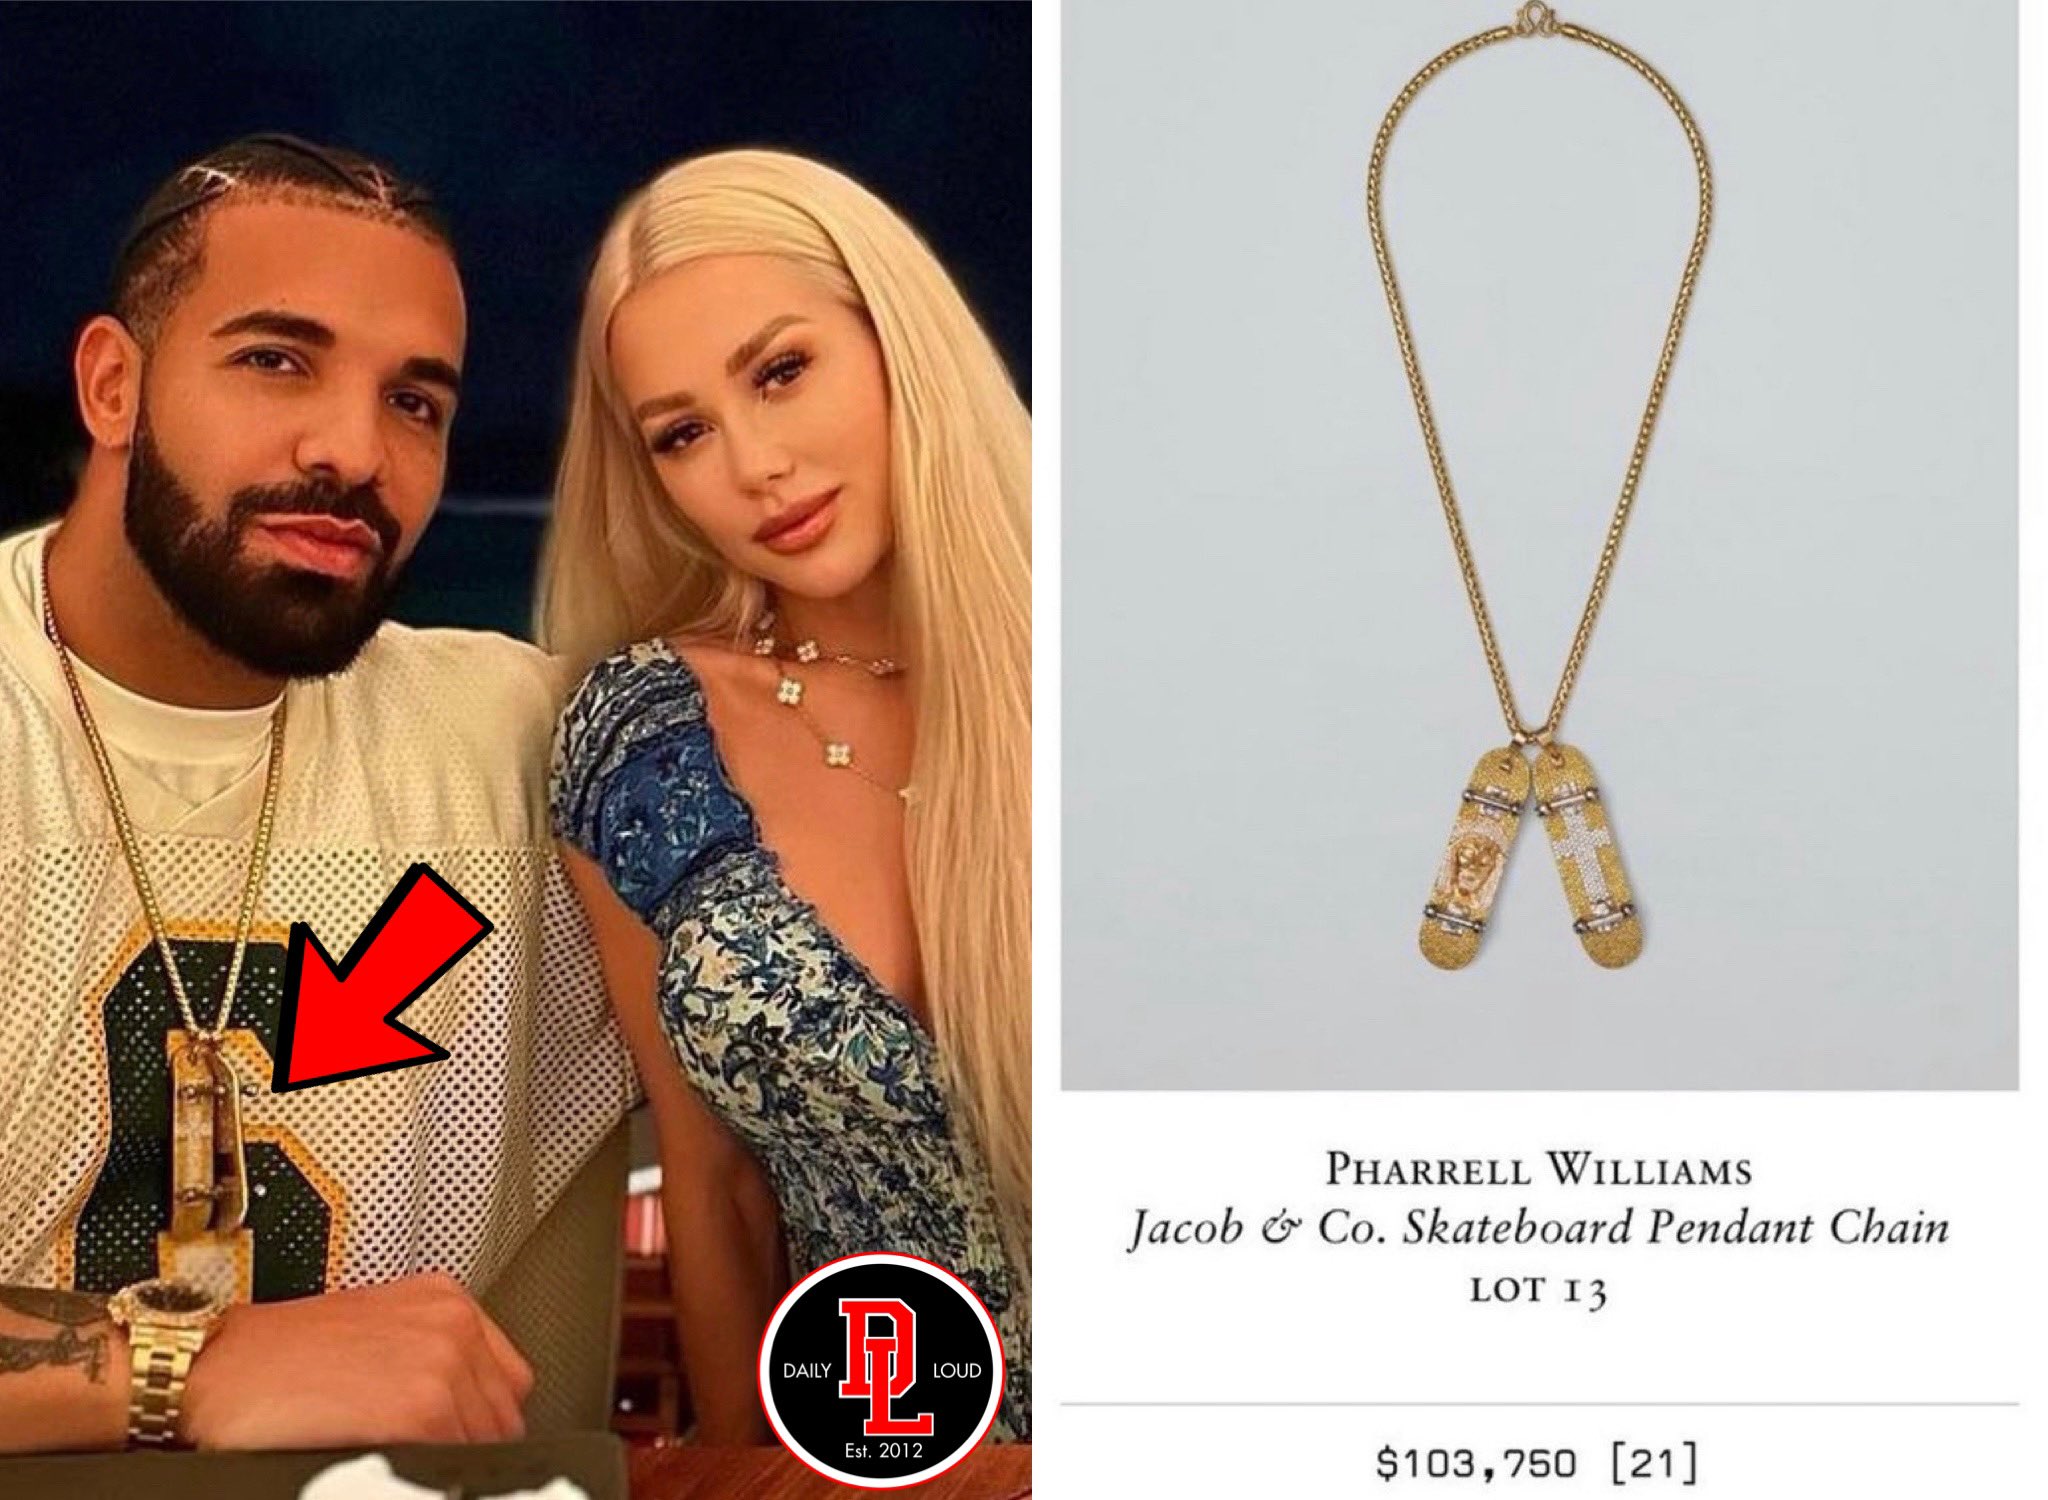 Sheesh. #Drake came for #Pharrell - the newest Louis Vuitton